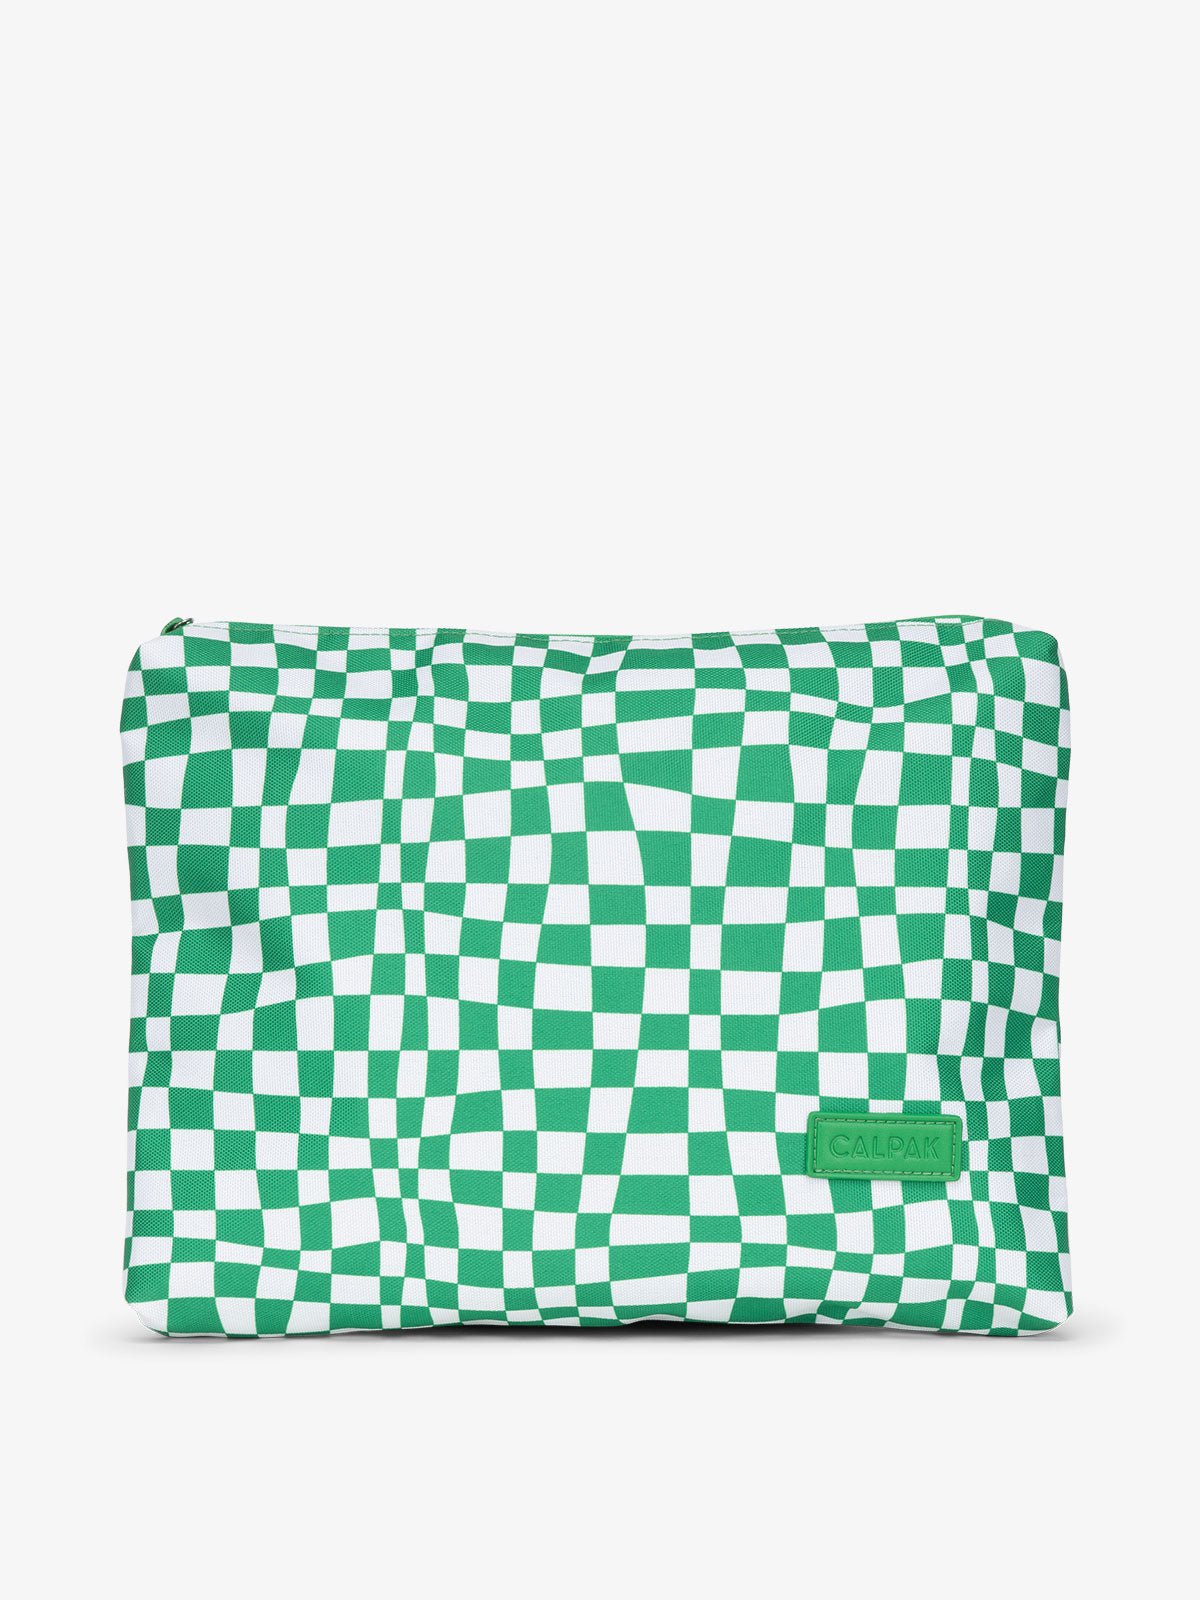 CALPAK water-resistant travel pouch for luggage in green checkerboard